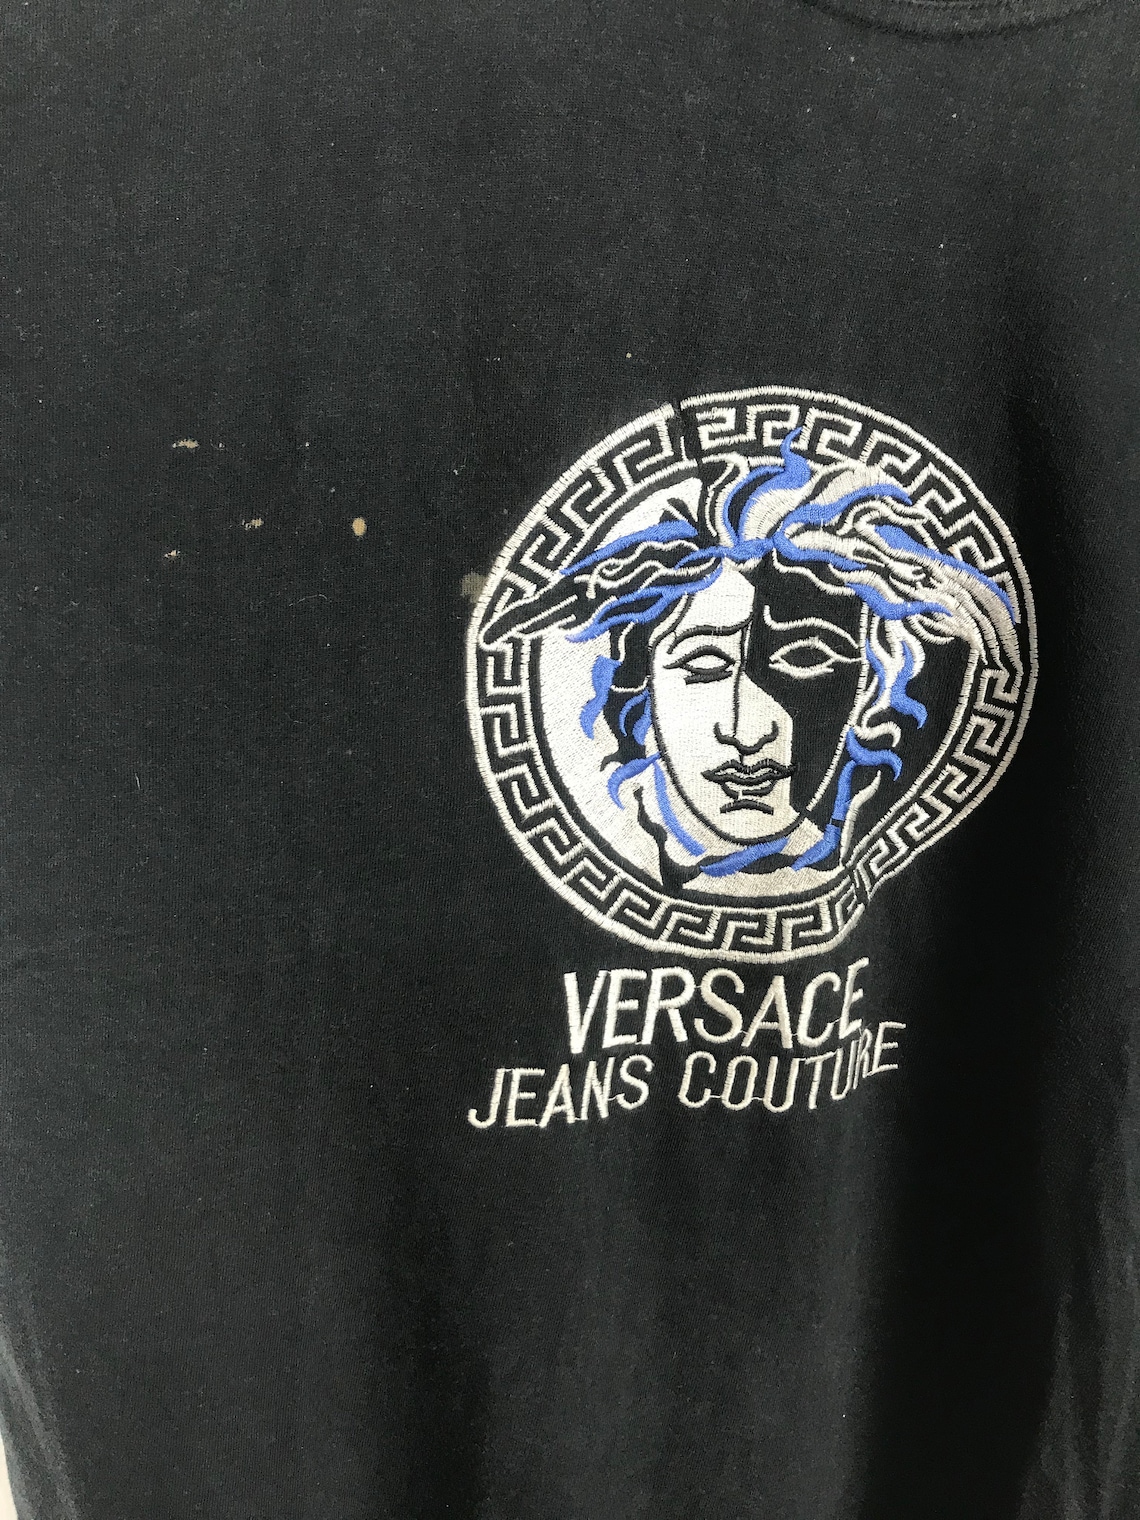 Versace Jeans Couture Embroidery Logo Shirt | Etsy